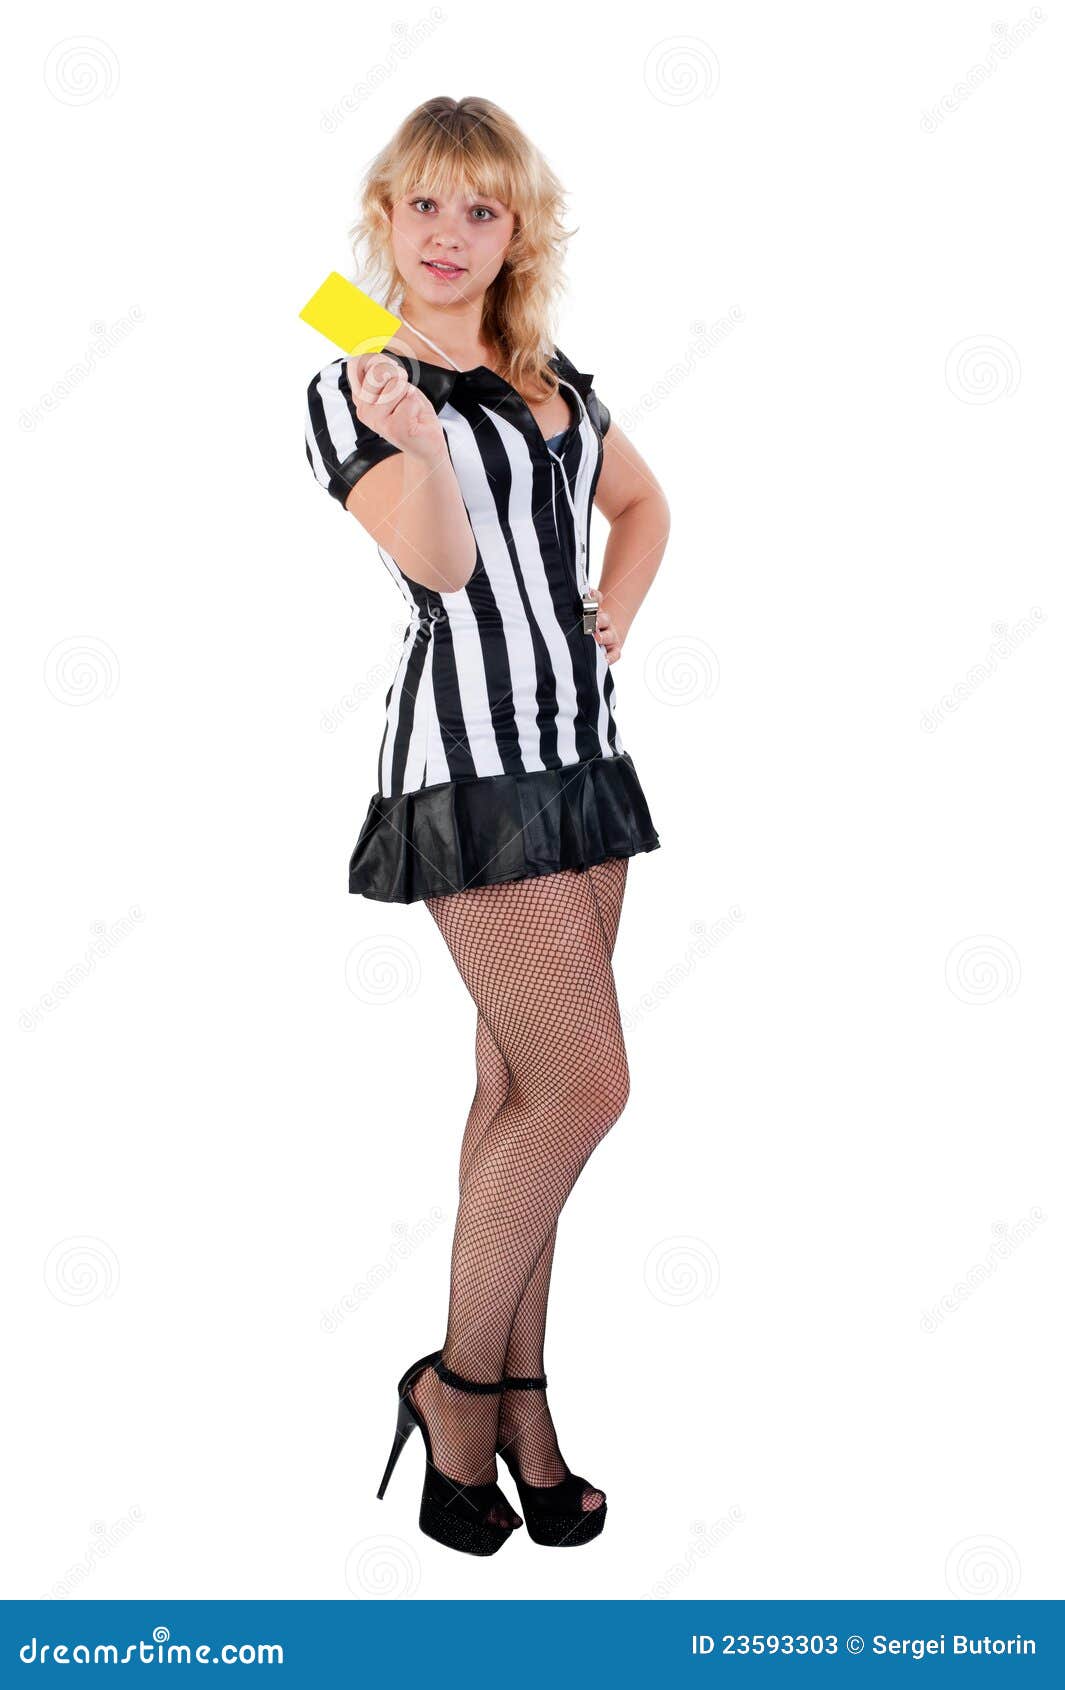 sexy-soccer-referee-yellow-card-23593303